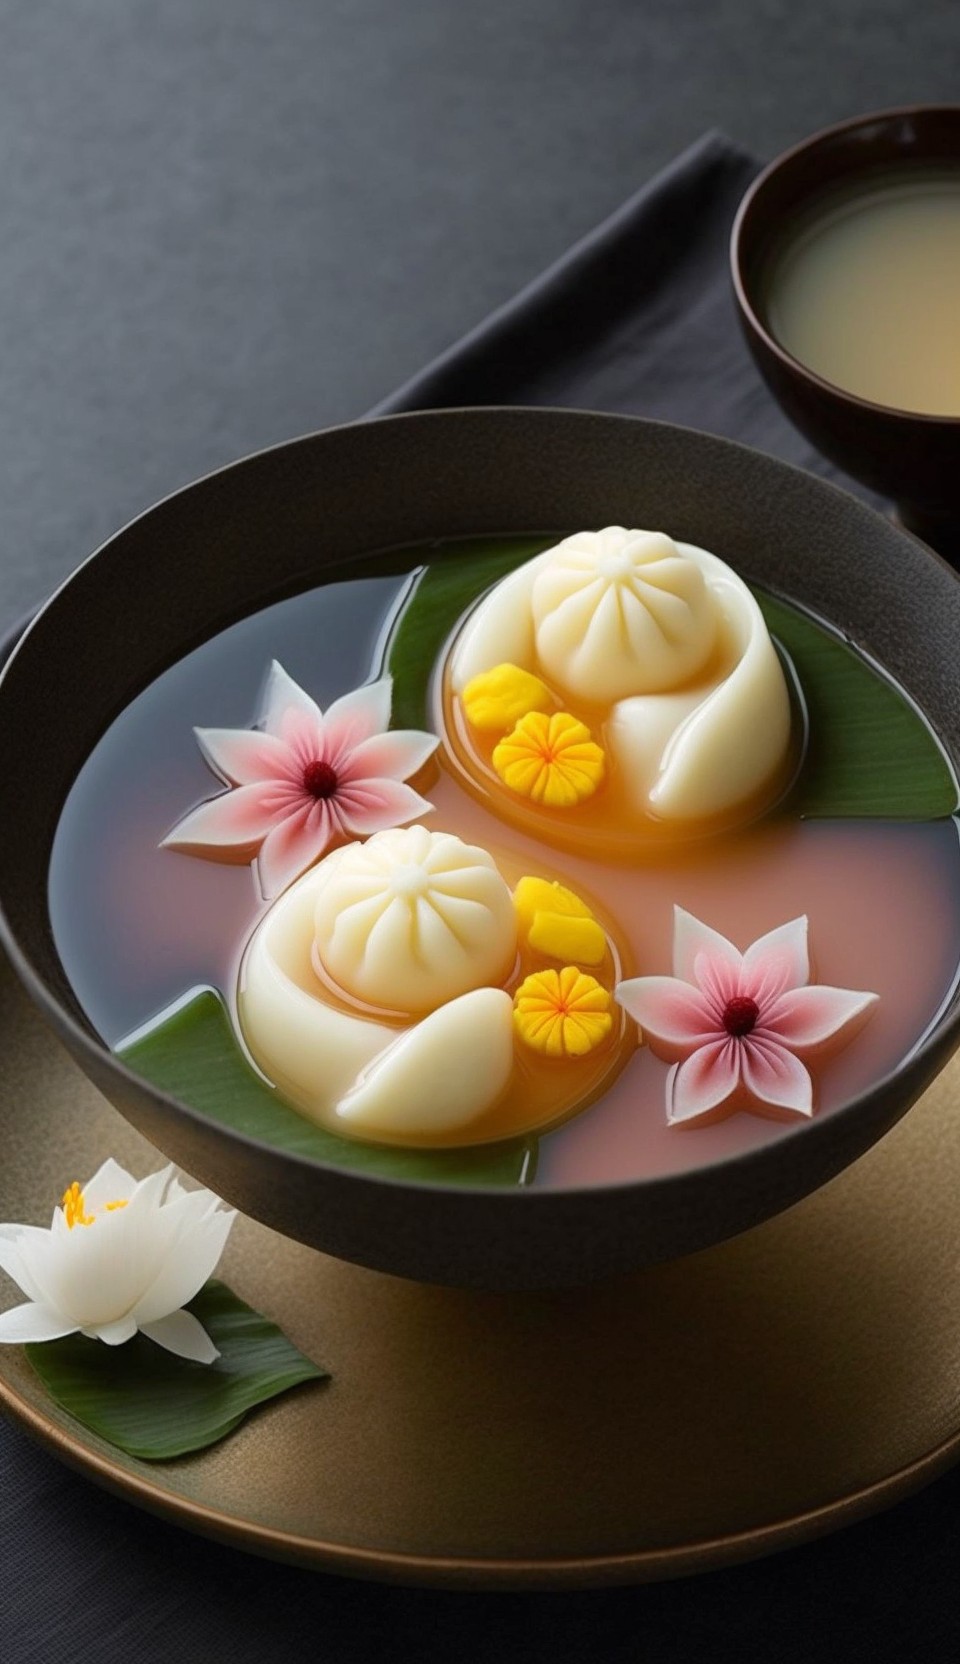 5 images of Lotus glutinous rice balls wish you a happy Lantern Festival by Midjourney